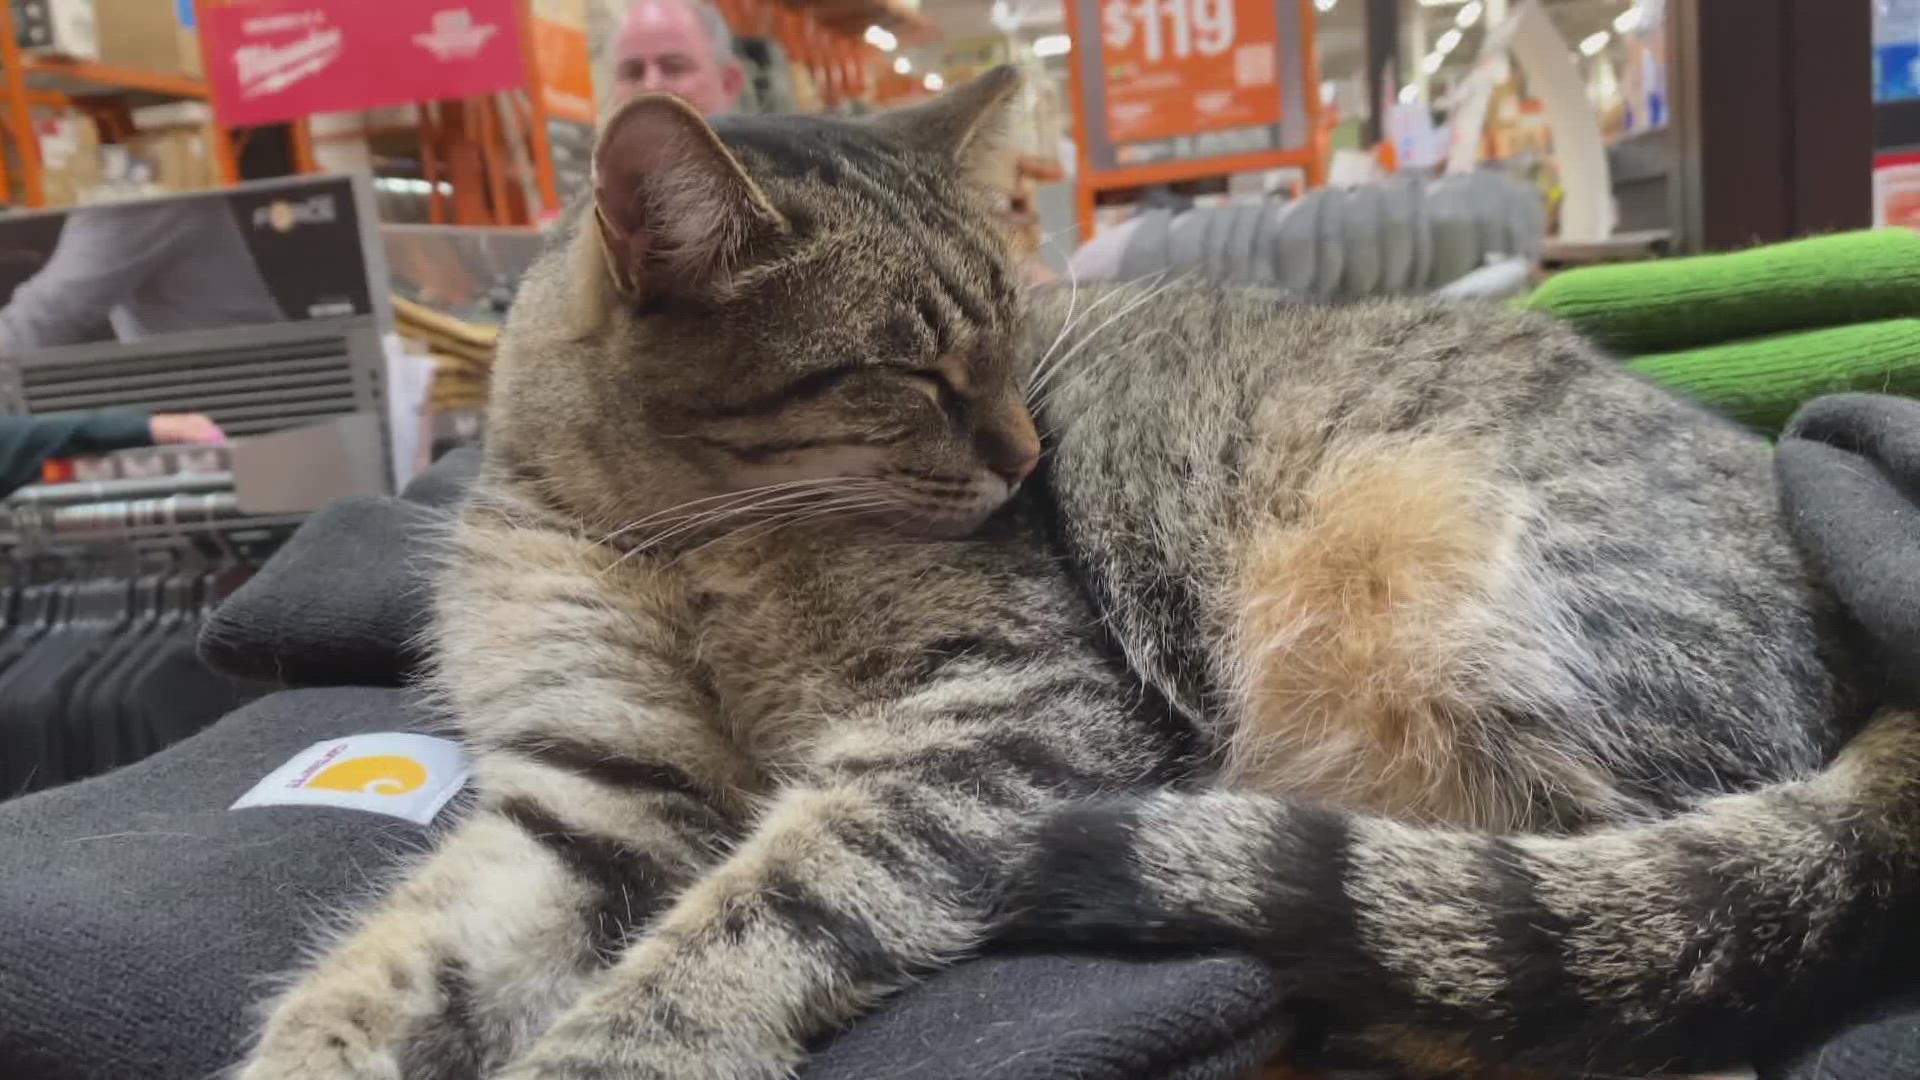 The cat has been a fixture at the Home Depot at 650 North 54th Street for the past six or seven years.